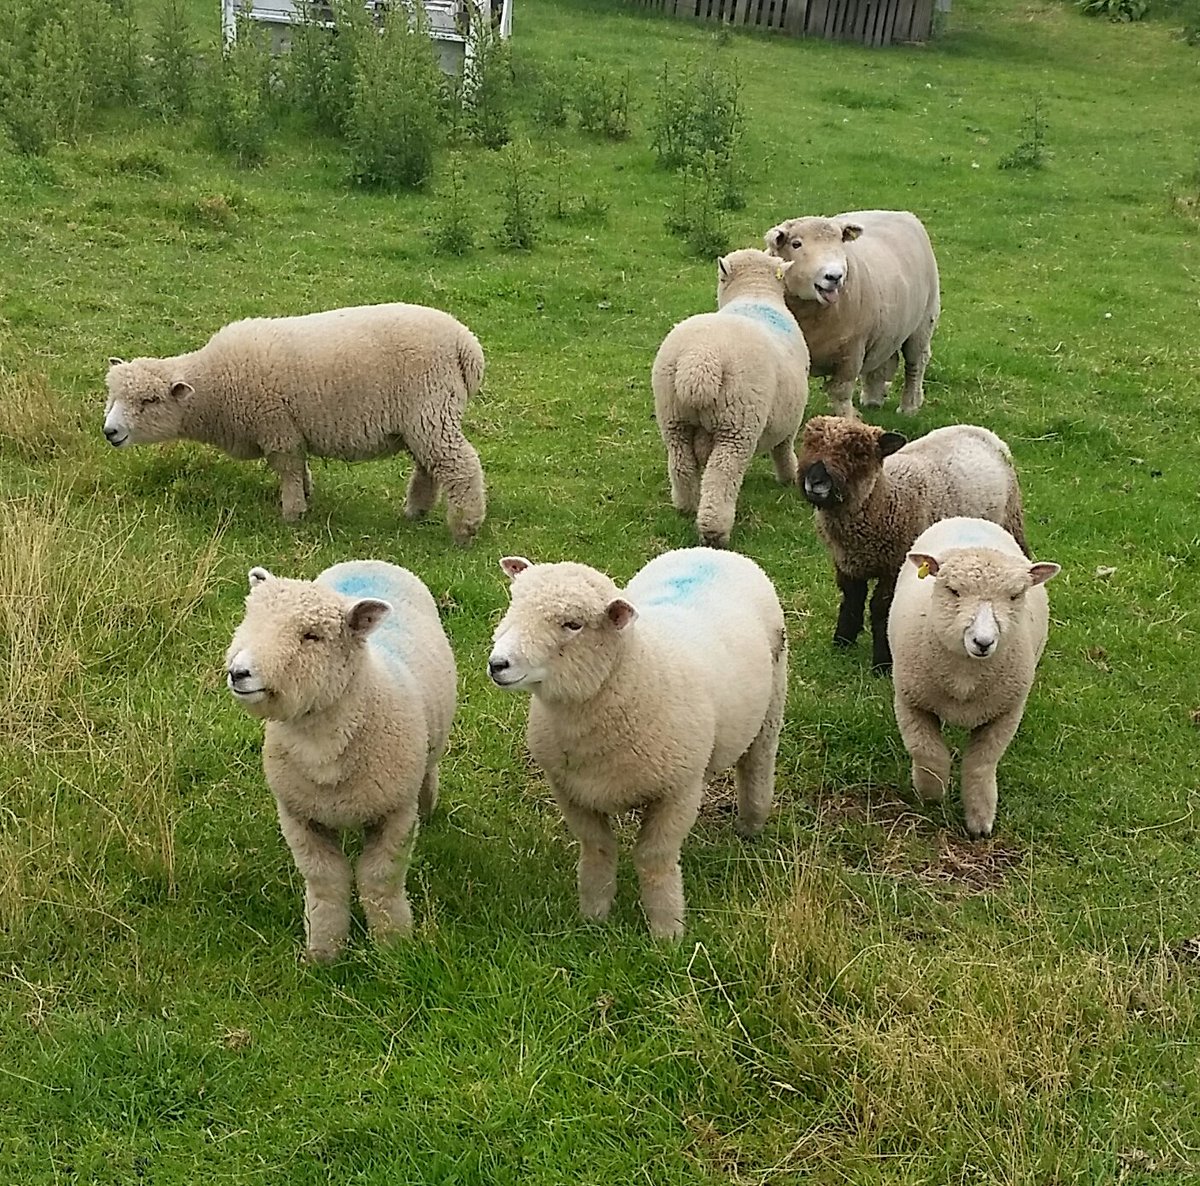 Dear twitter You don't have to (repeatedly) tell me how to vote or who to vote for. I'm an adult. Unrelated, here are some sheep. Best wishes Steve